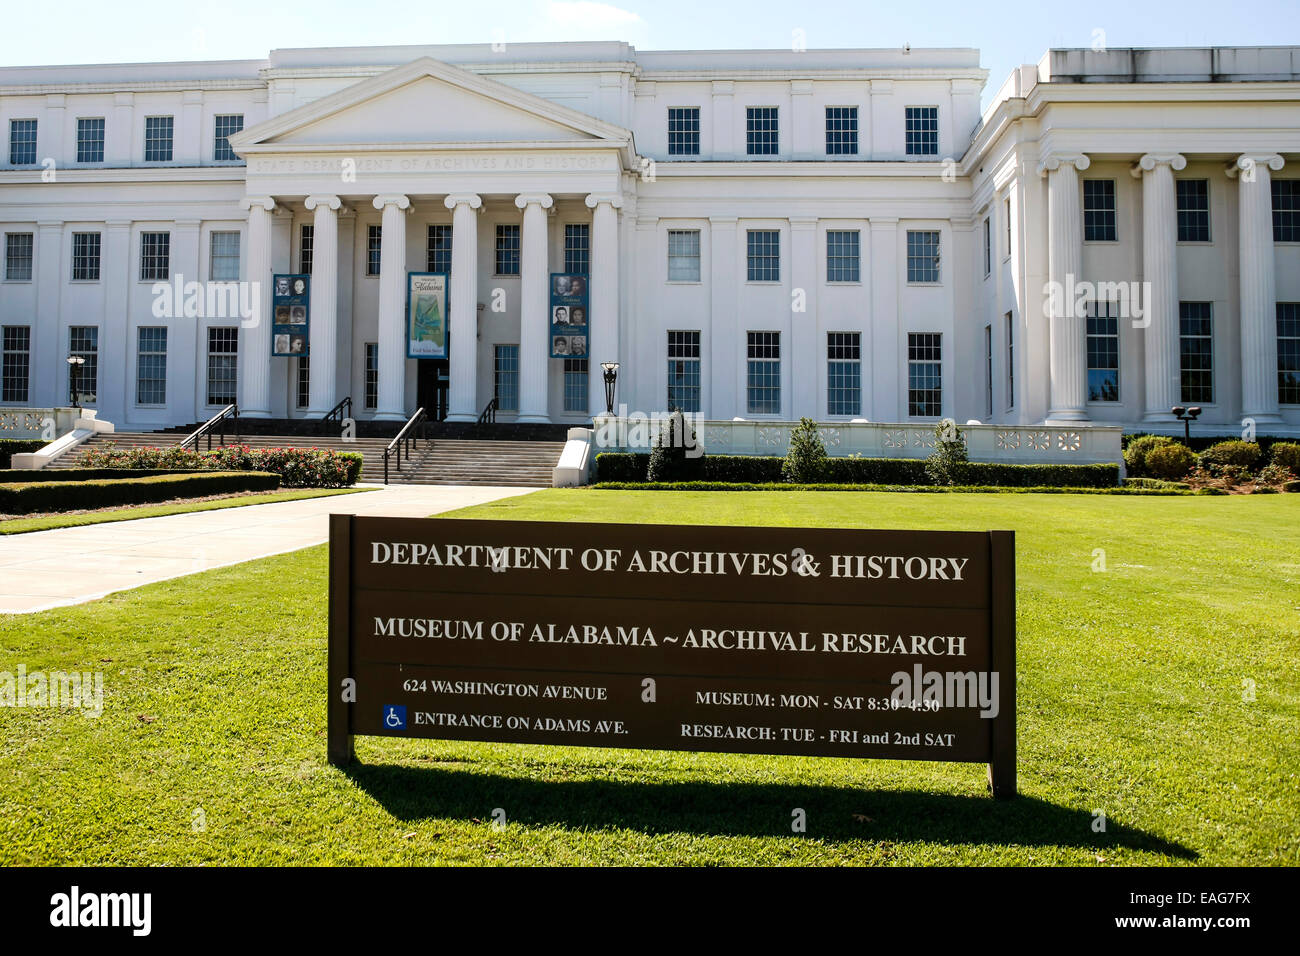 The Department of Archives and History building in Montgomery Alabama Stock Photo